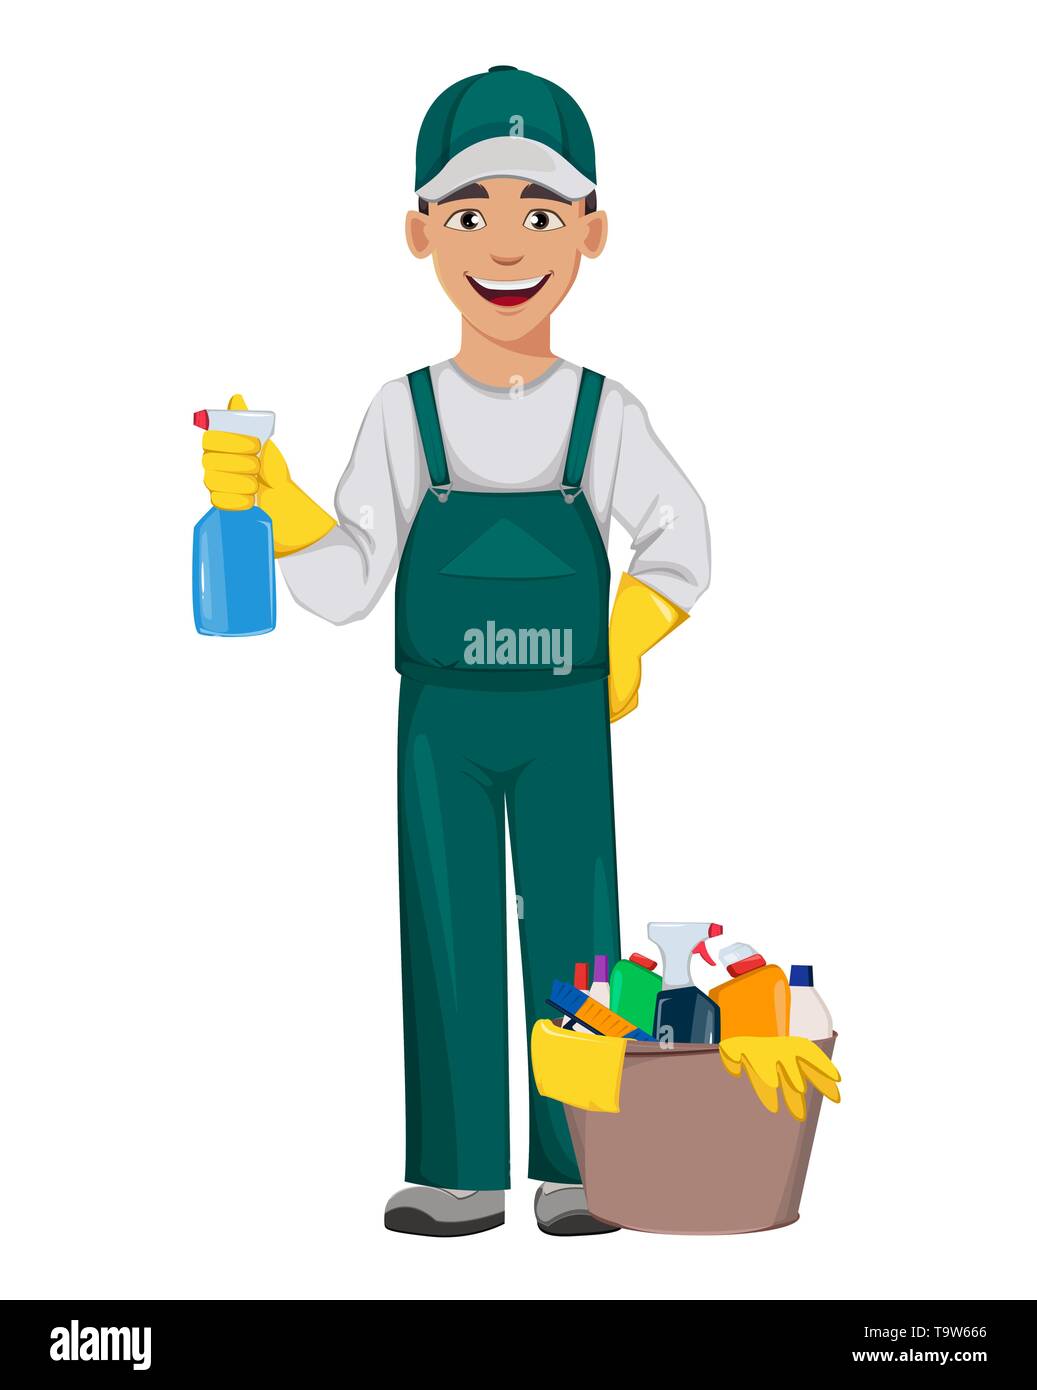 Cleaner man cartoon character holding sprayer. Cleaning service concept. Vector illustration isolated on white background Stock Vector